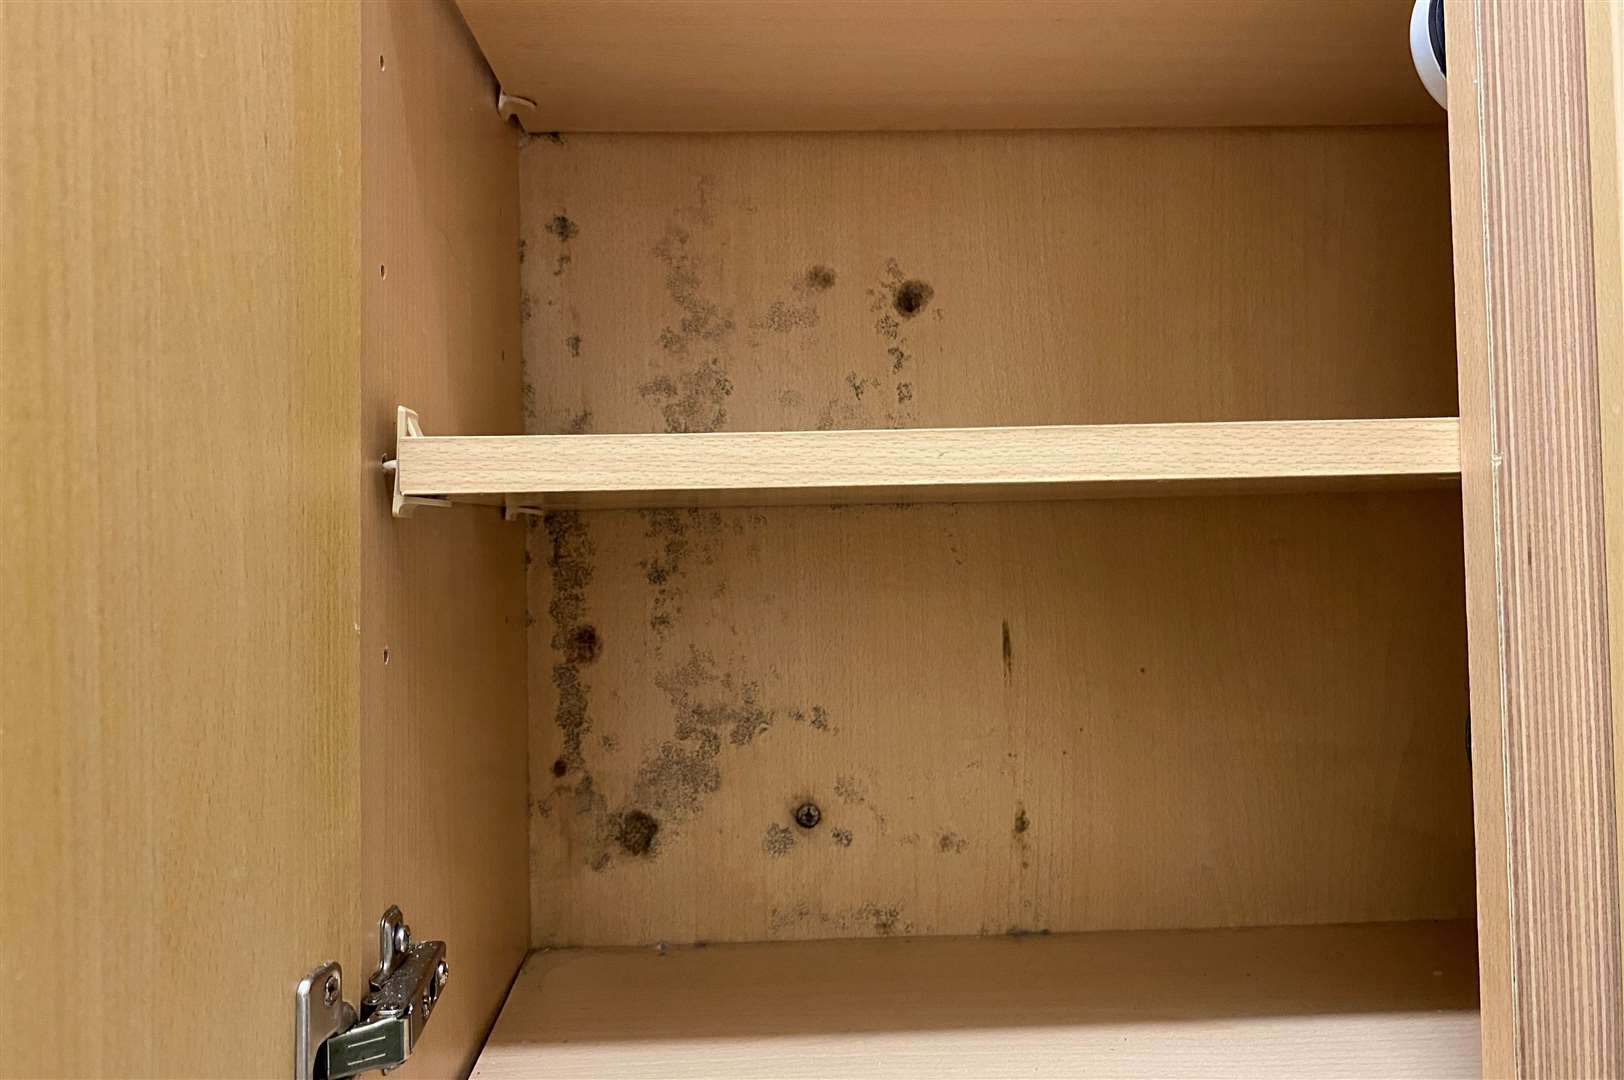 Cupboards in the kitchen are wet and damp, causing the growth of mould